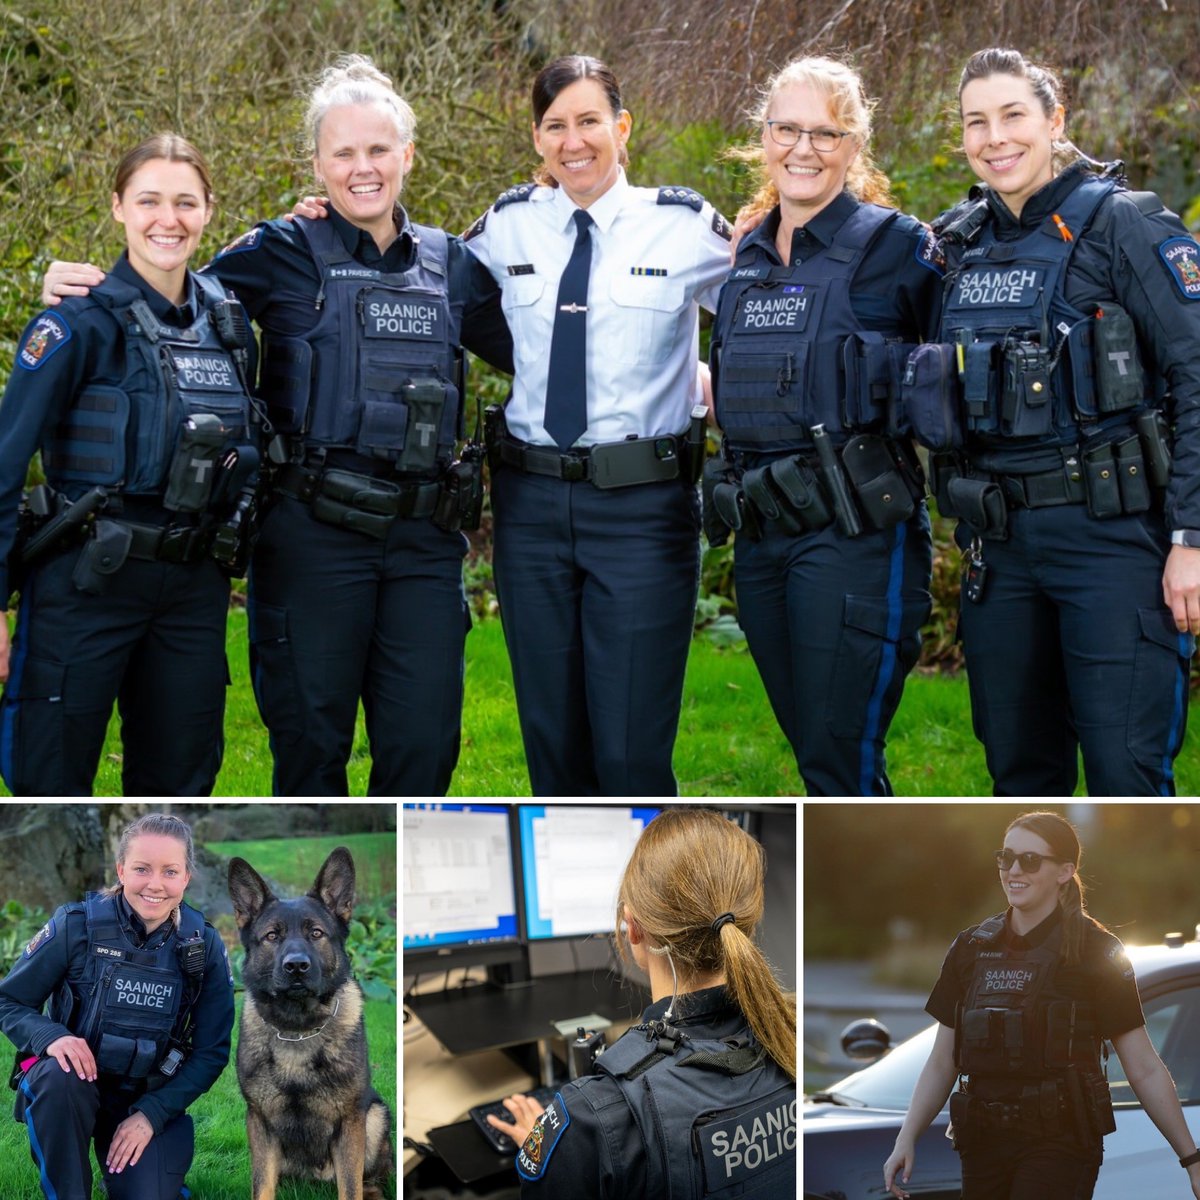 Celebrating the amazing women at Saanich Police who are dedicated to serving our community each and every day.
We recognize the tremendous contributions to policing they have made over the past several decades and they continue to inspire us all!
Happy #NationalPoliceWomanDay